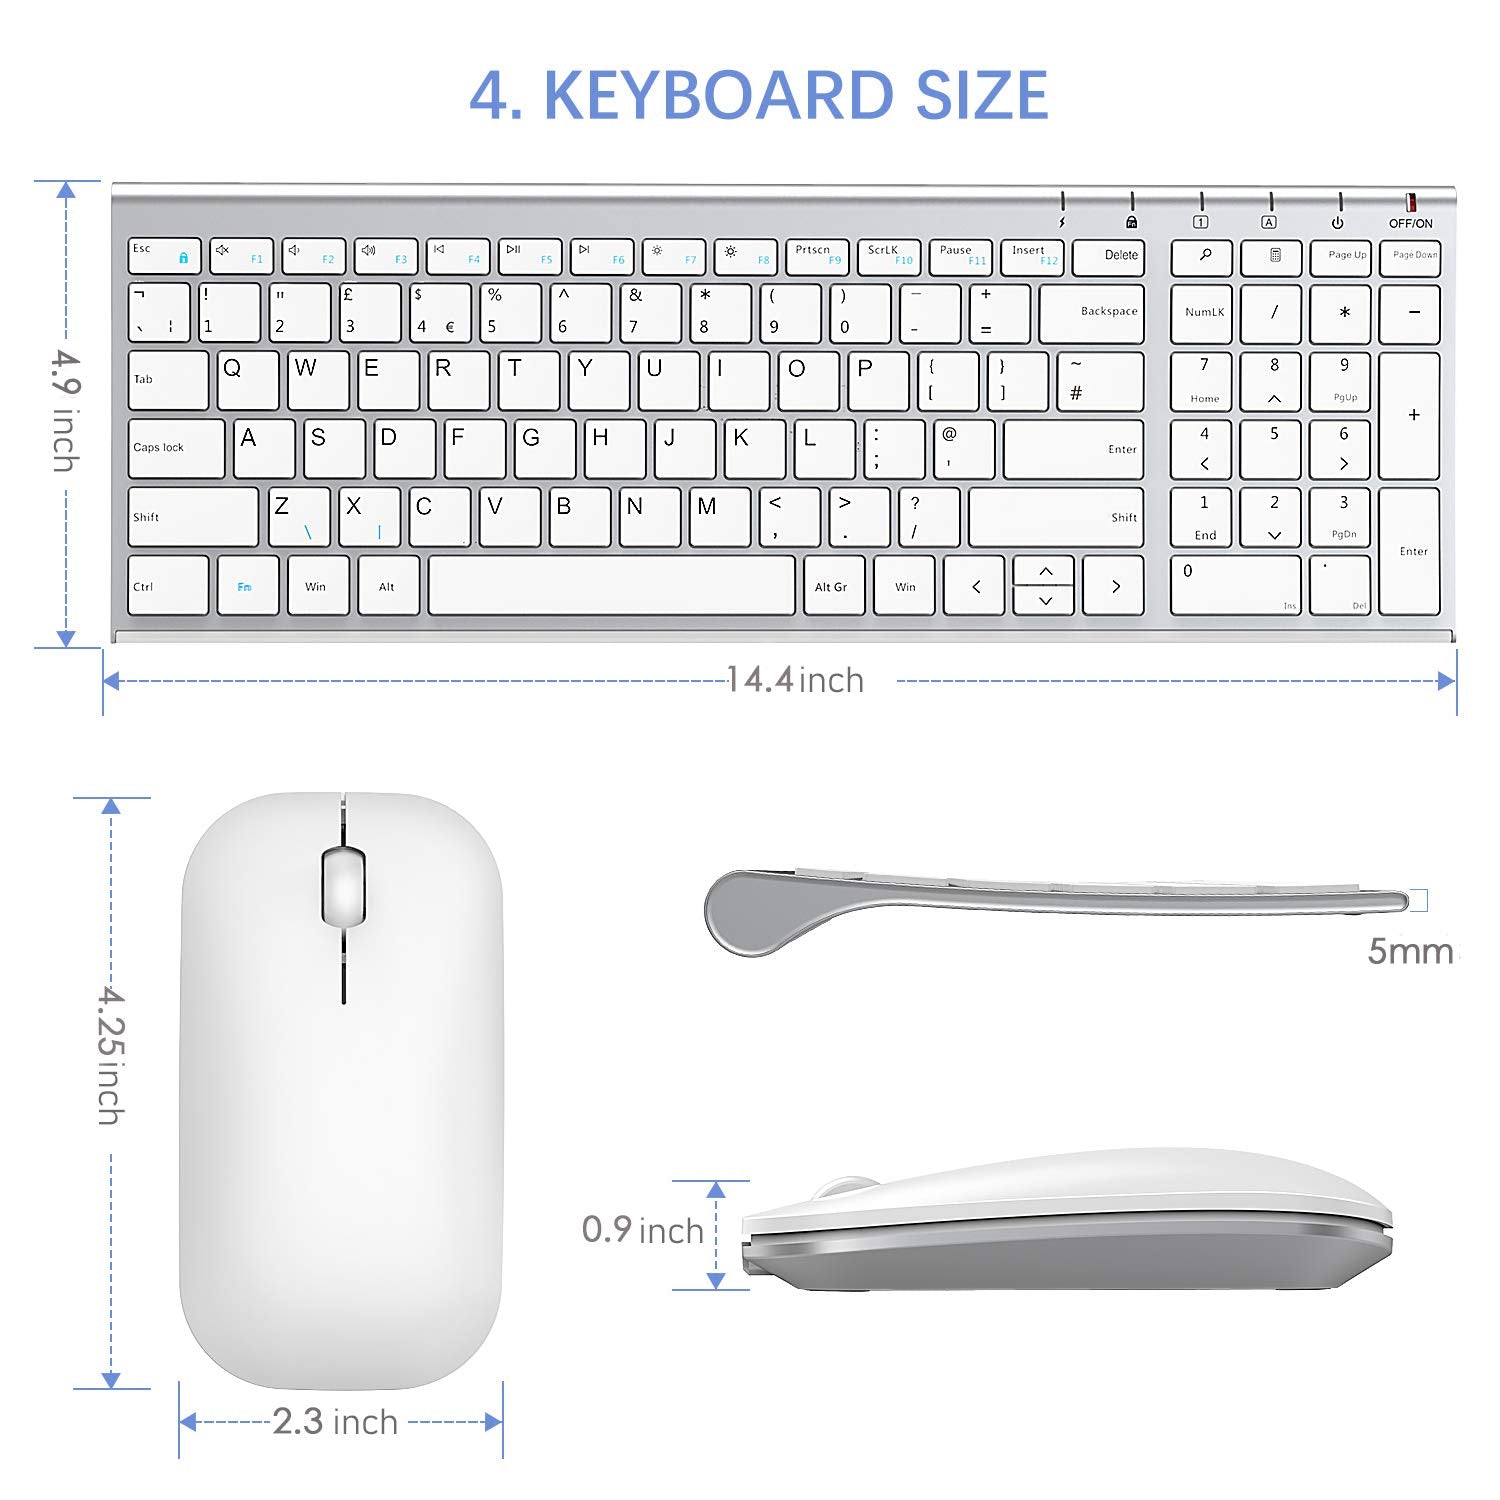 Rechargeabe Wireless Keyboard Mouse, Seenda Slim Thin Silent Keyboard and Mouse Set with Long Battery Life QWERTY UK Layout for Windows PC Laptop Computer, Silver White